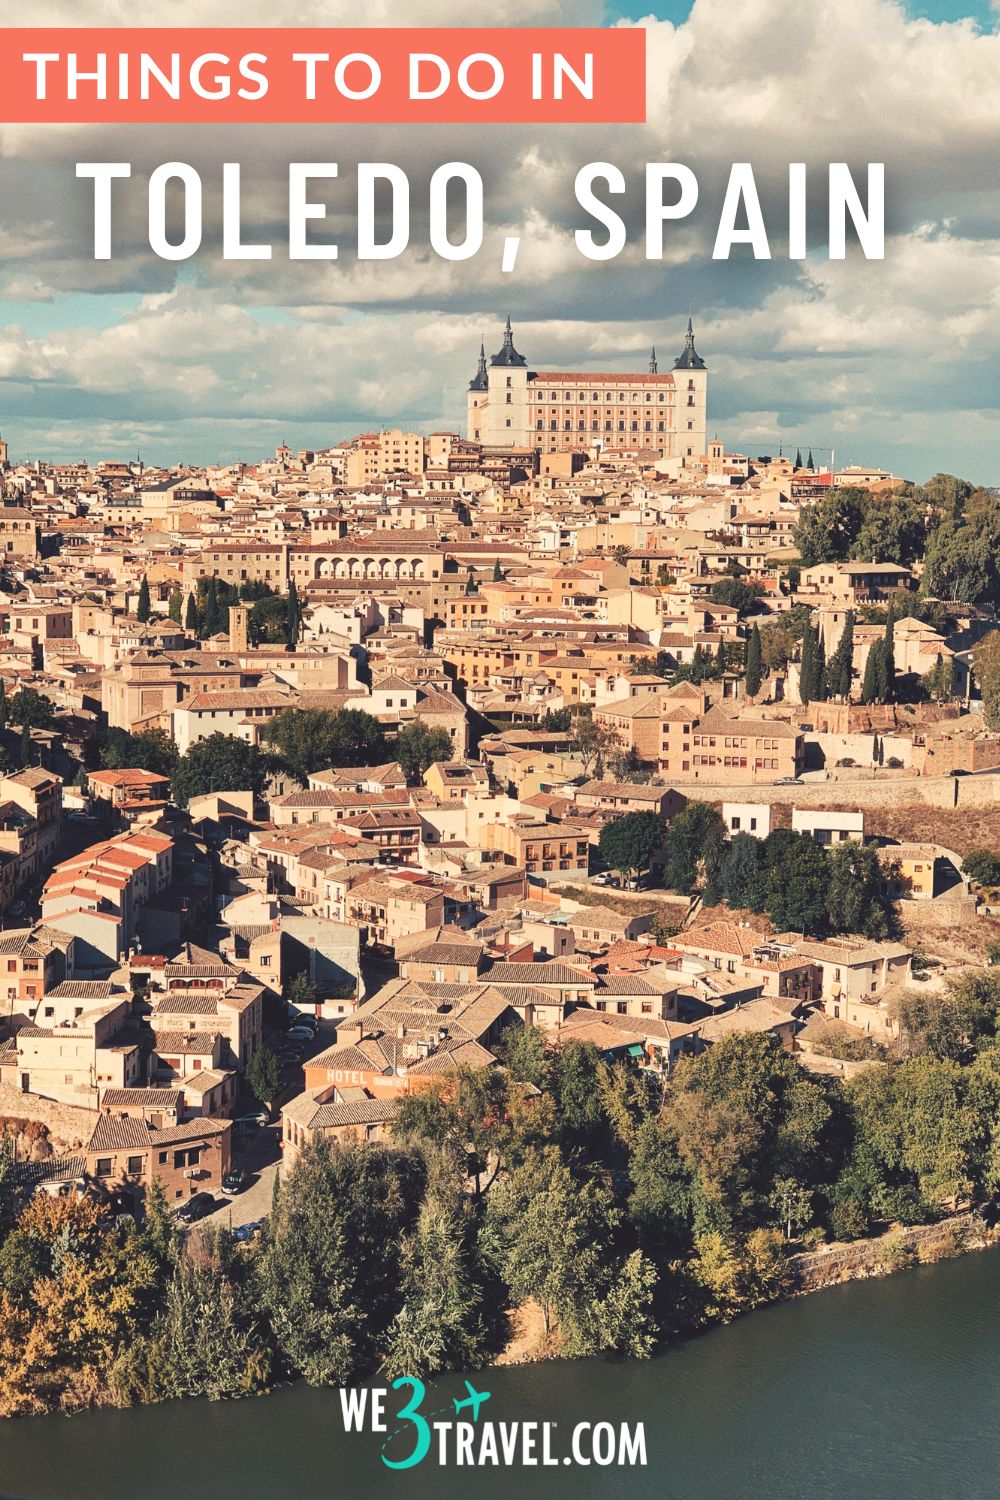 When planning a vacation to Spain, be sure to include a day trip to Toledo from Madrid on your trip itinerary. Called the "Soul of Spain", Toledo is known for its Gothic Cathedral, Alcazar, and blend of Christian, Jewish, and Muslim history and culture.